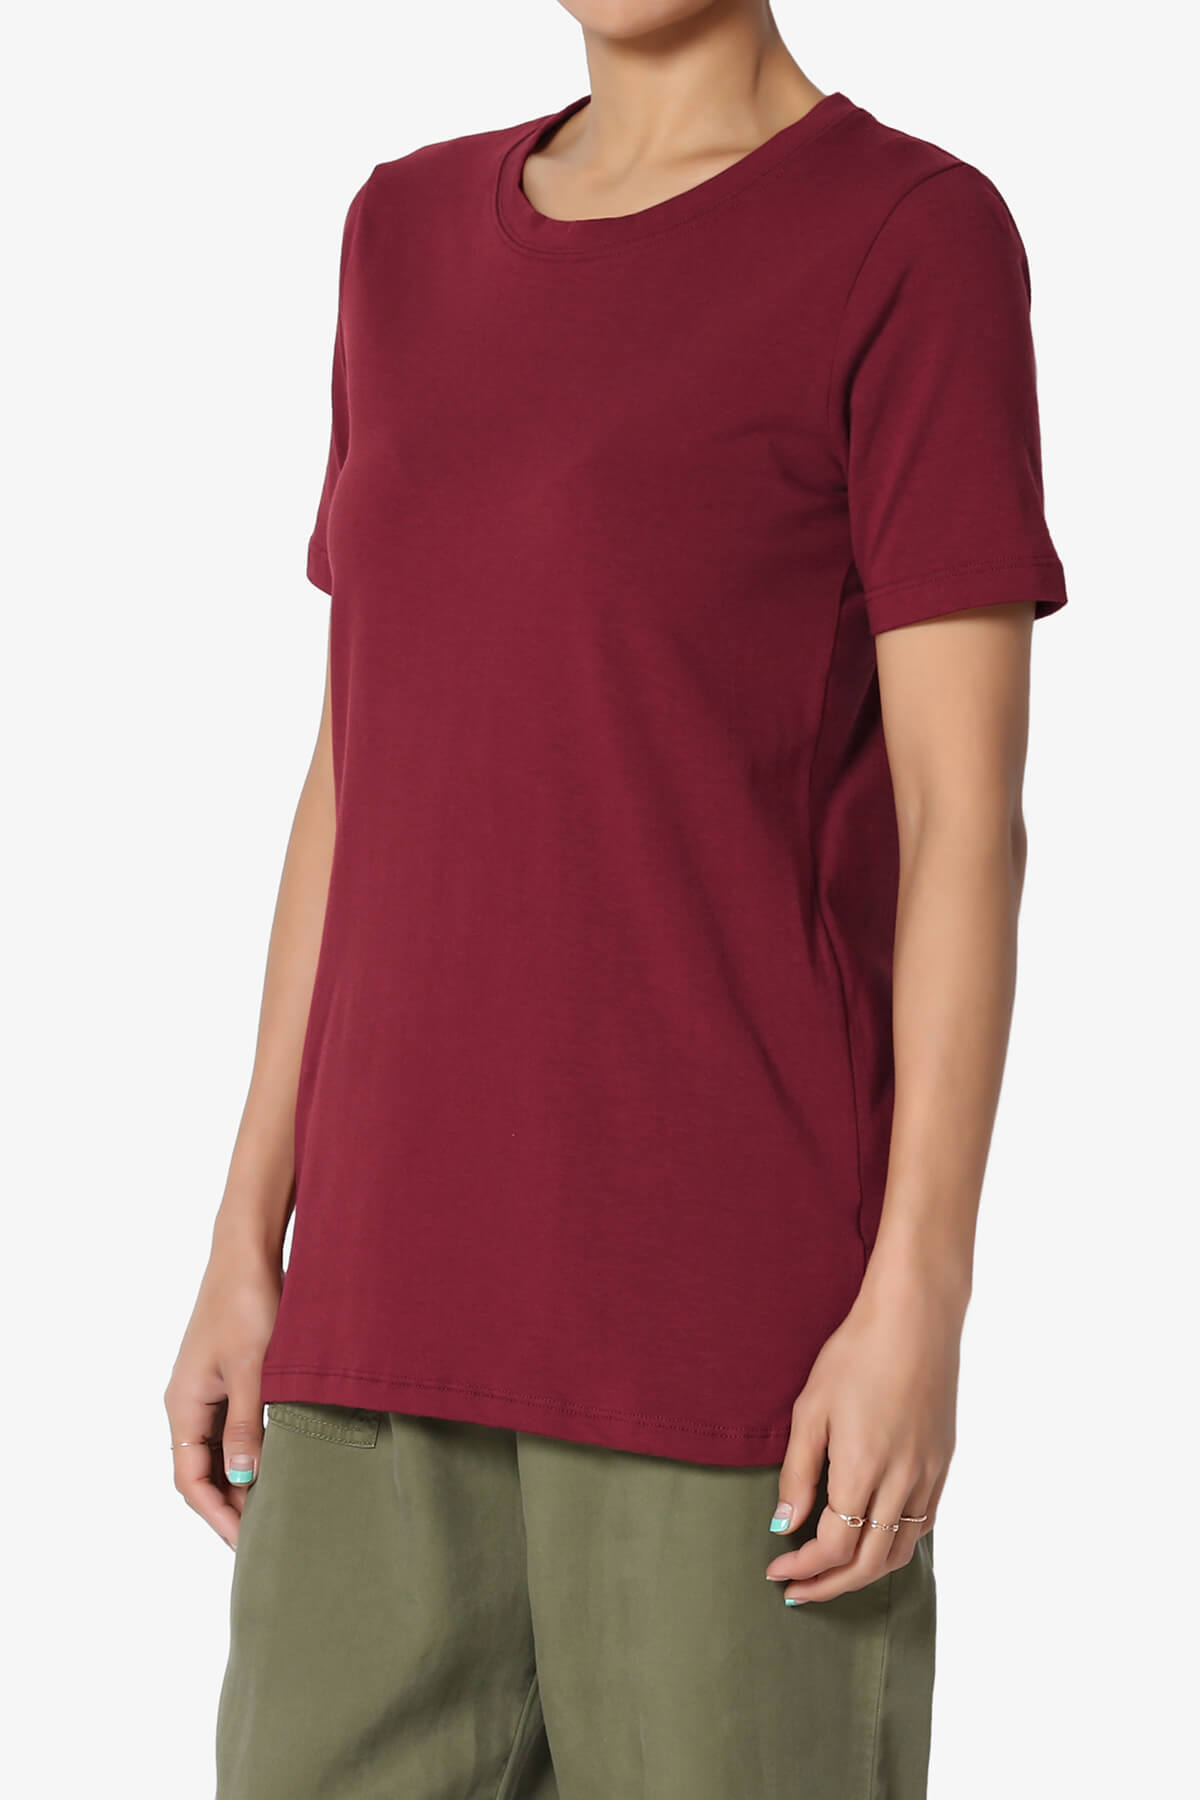 Load image into Gallery viewer, Elora Crew Neck Short Sleeve T-Shirt BURGUNDY_3
